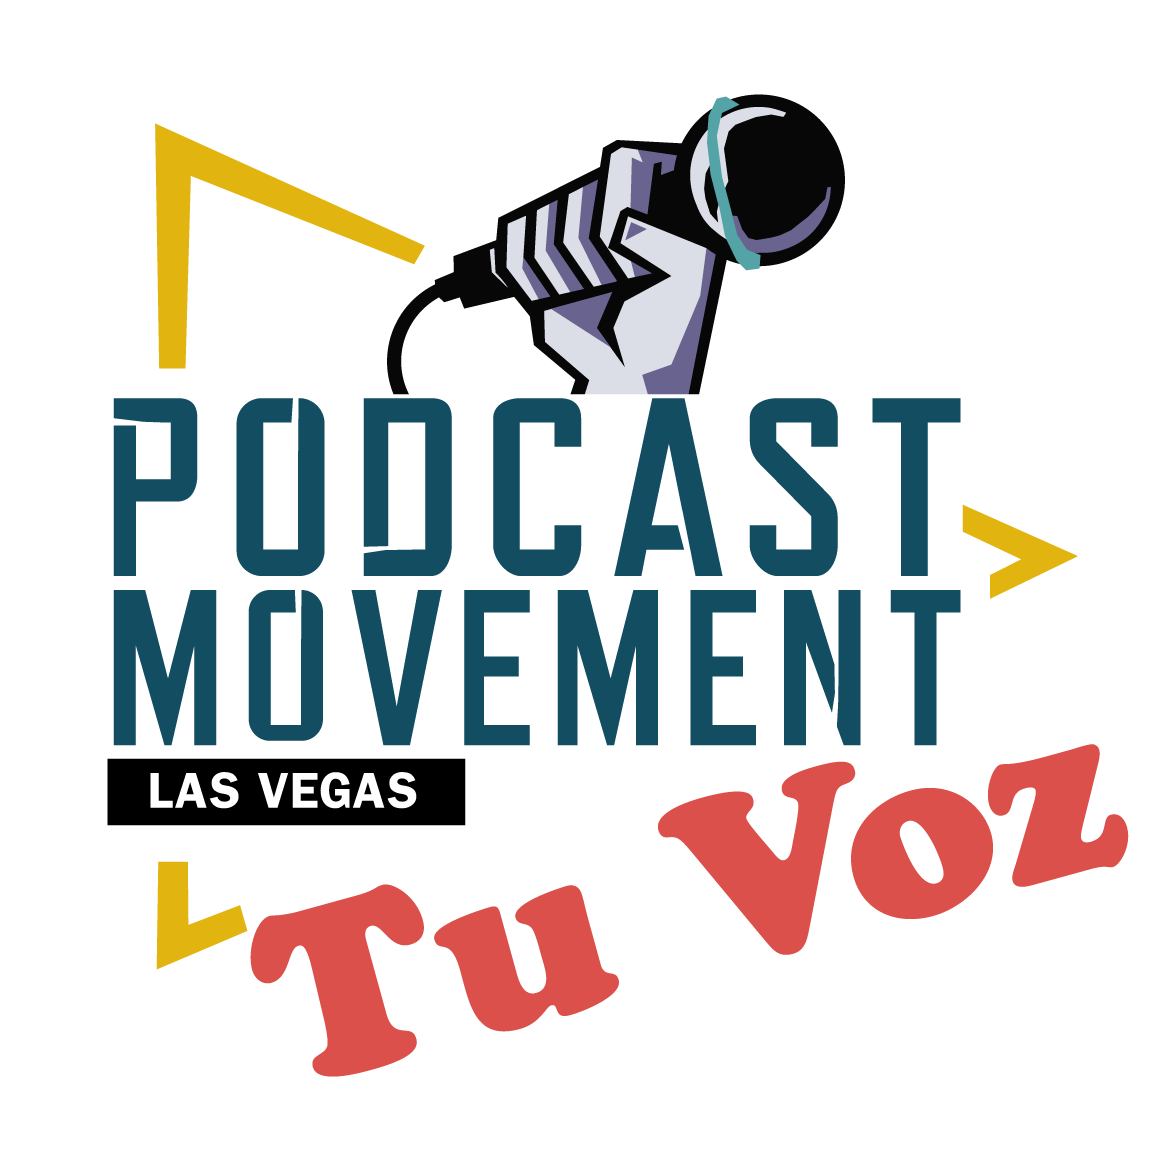 Podcast Movement Events Podcast Movement